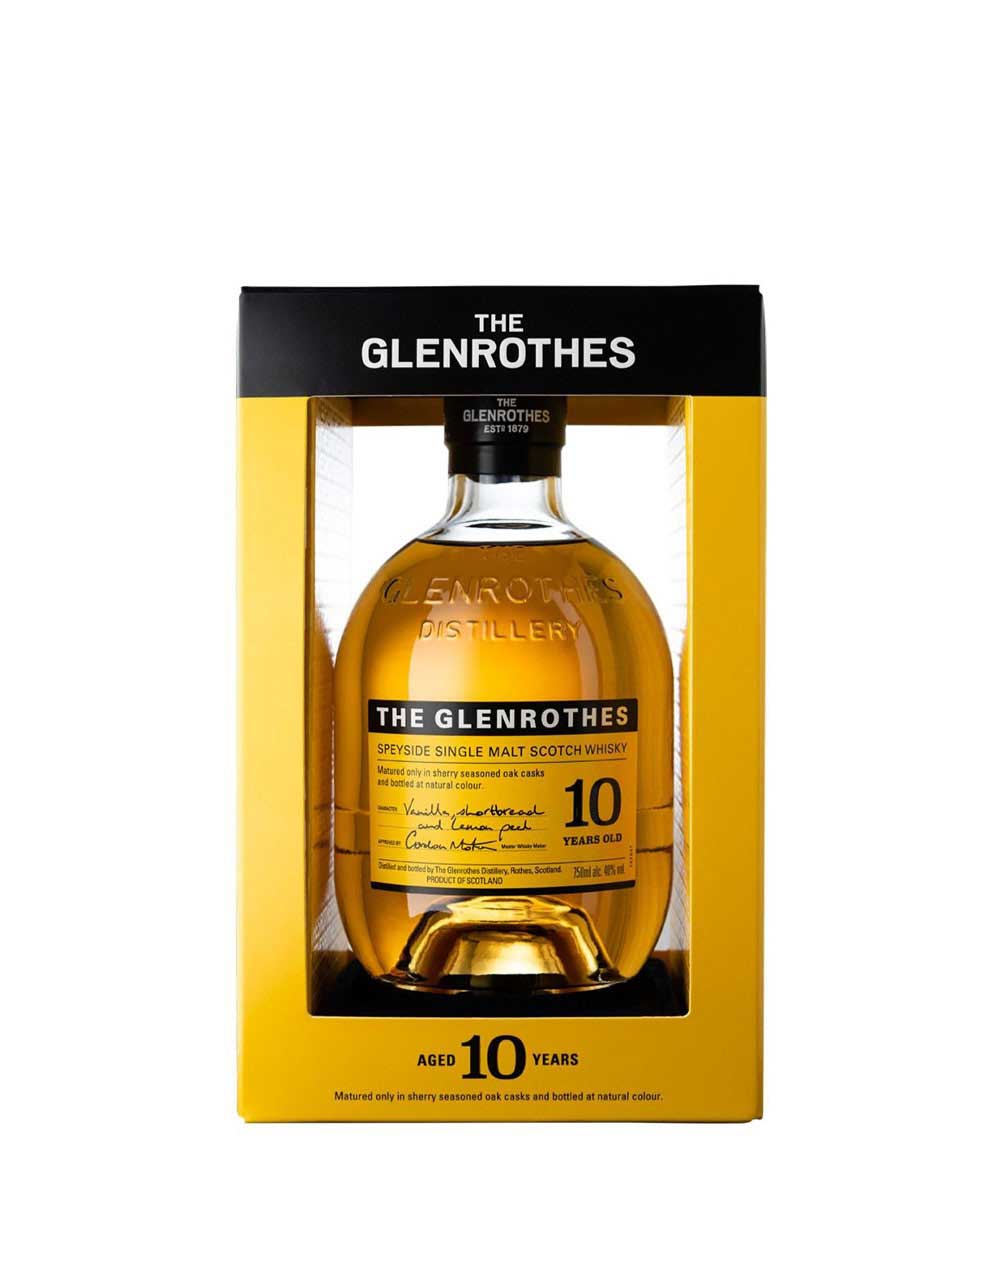 The Glenrothes 10 Year Old